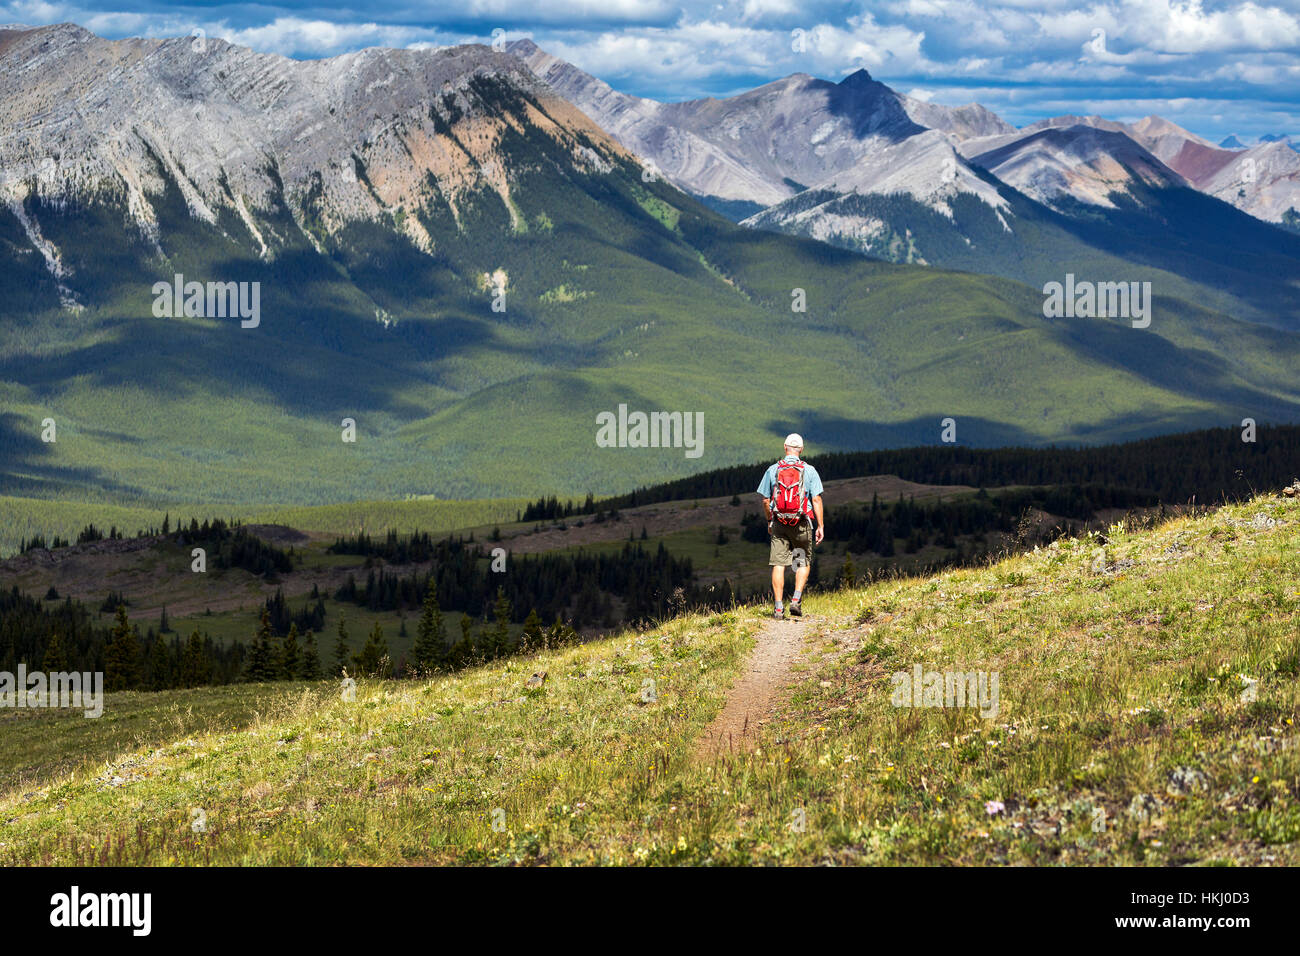 Male hiker walking along a hillside trail overlooking mountain range and valley with a cloudy sky, West of Bragg Creek; Alberta, Canada Stock Photo